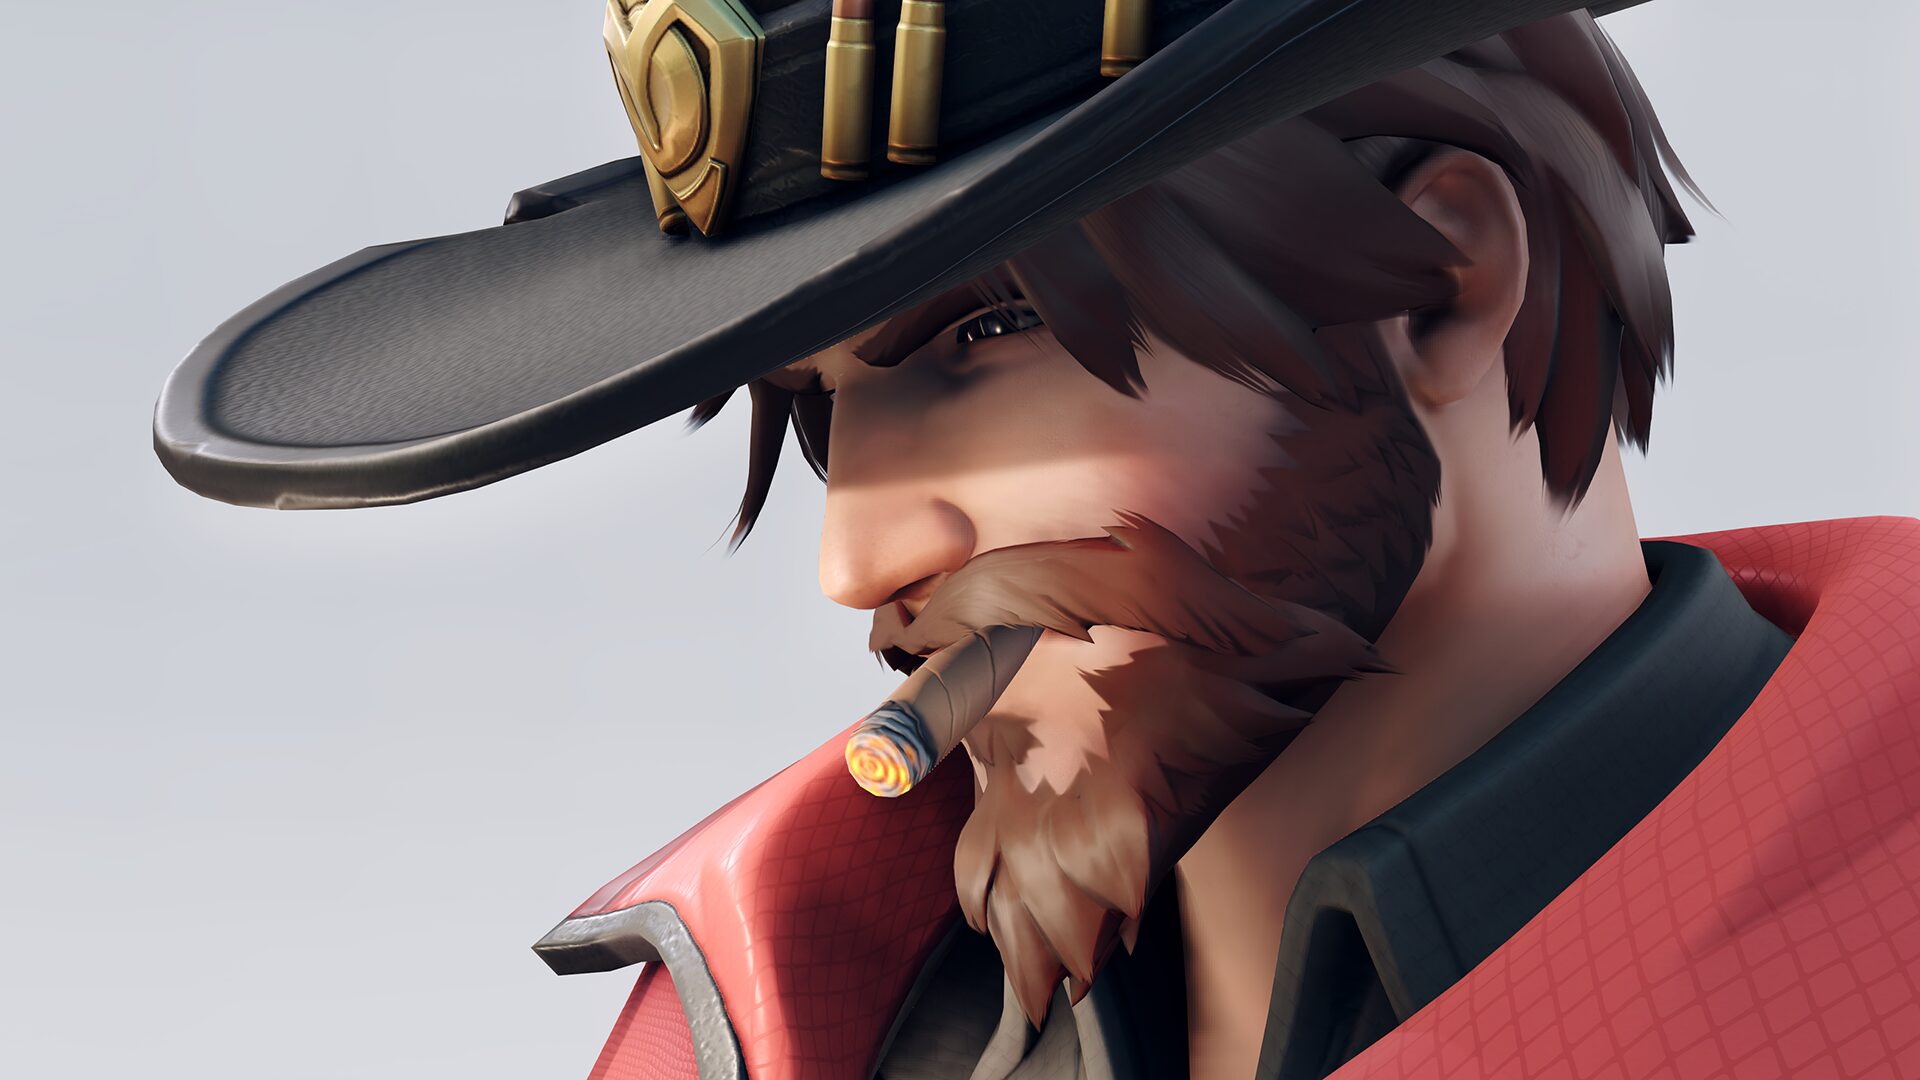 mccree becomes cole cassidy